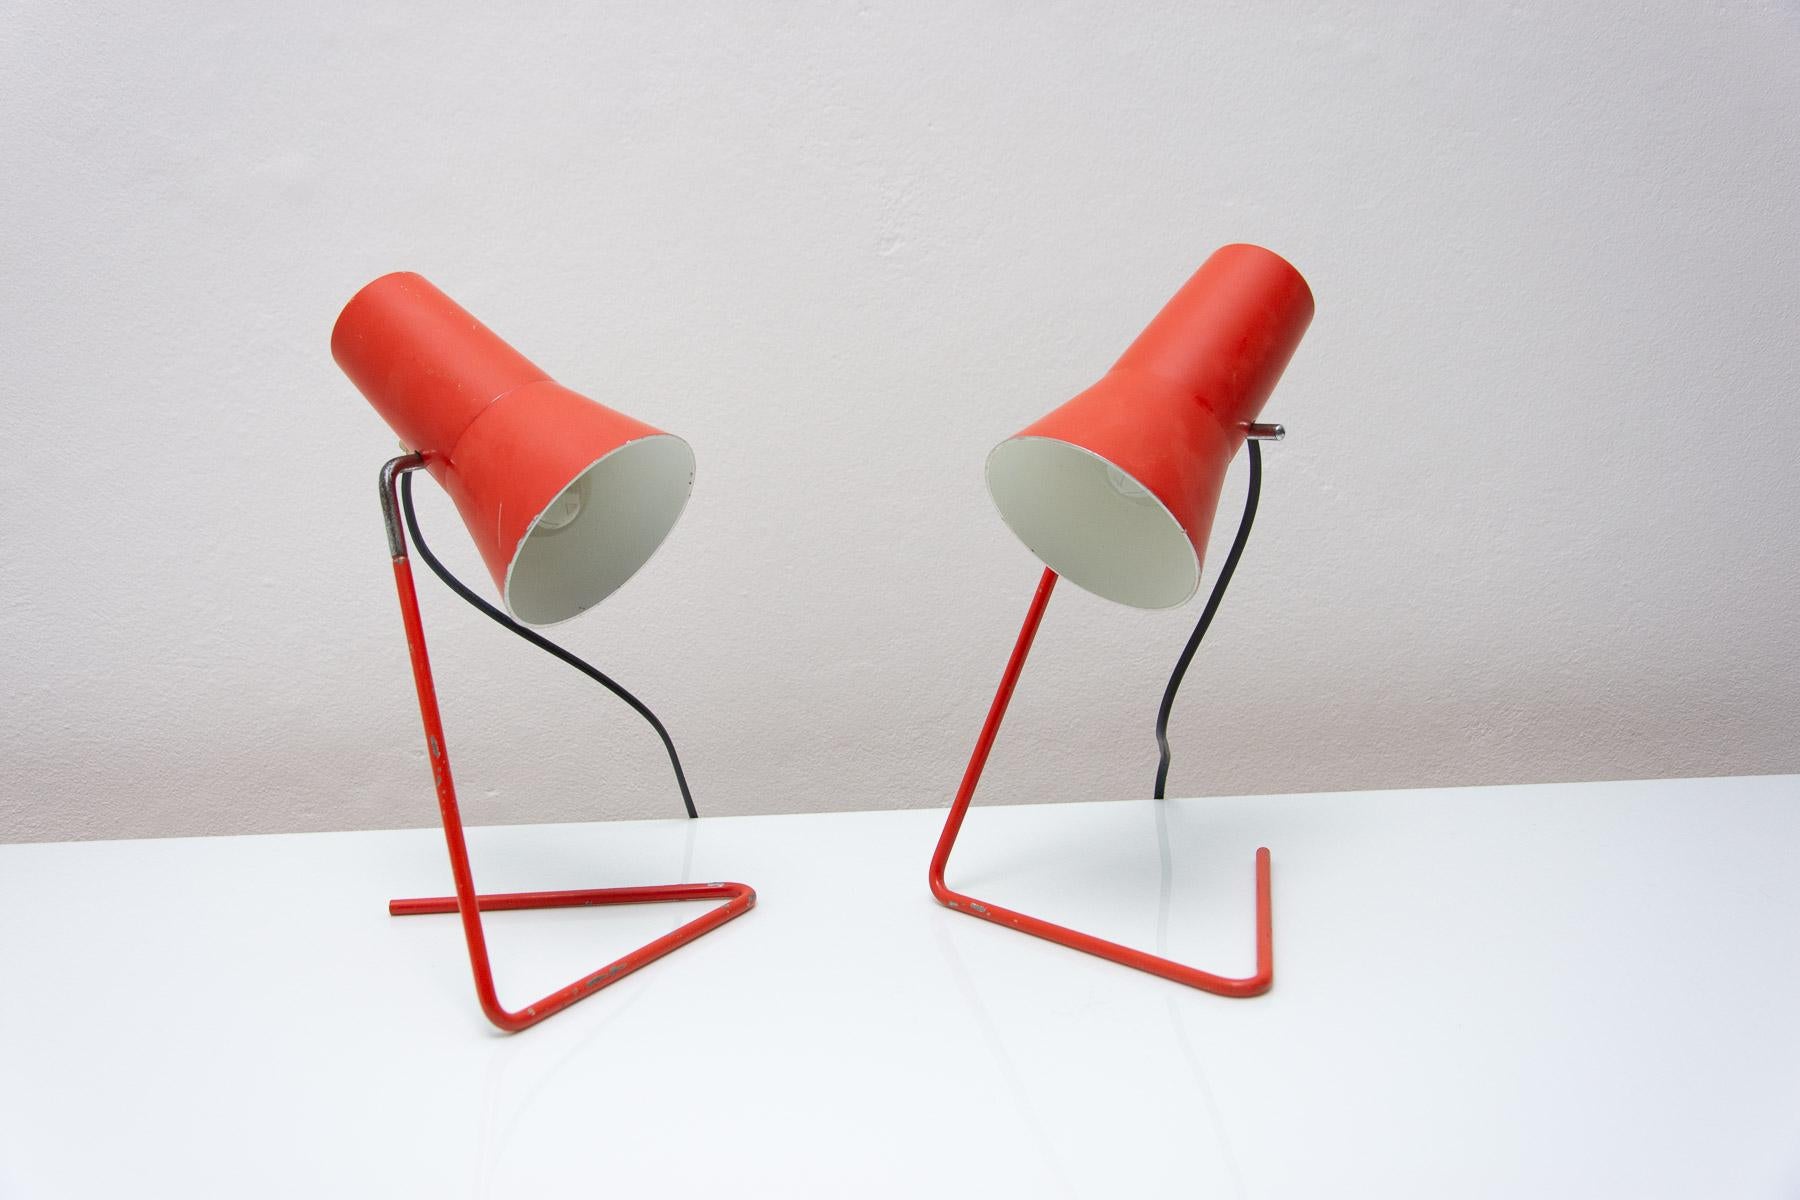 These mid century table lamps designed by Josef Hurka for Napako will complement mid century or vintage furniture from our offer.

It features a curved structure to which a red cone-shaped shade is attached. Other material: aluminum, plastic. Fully